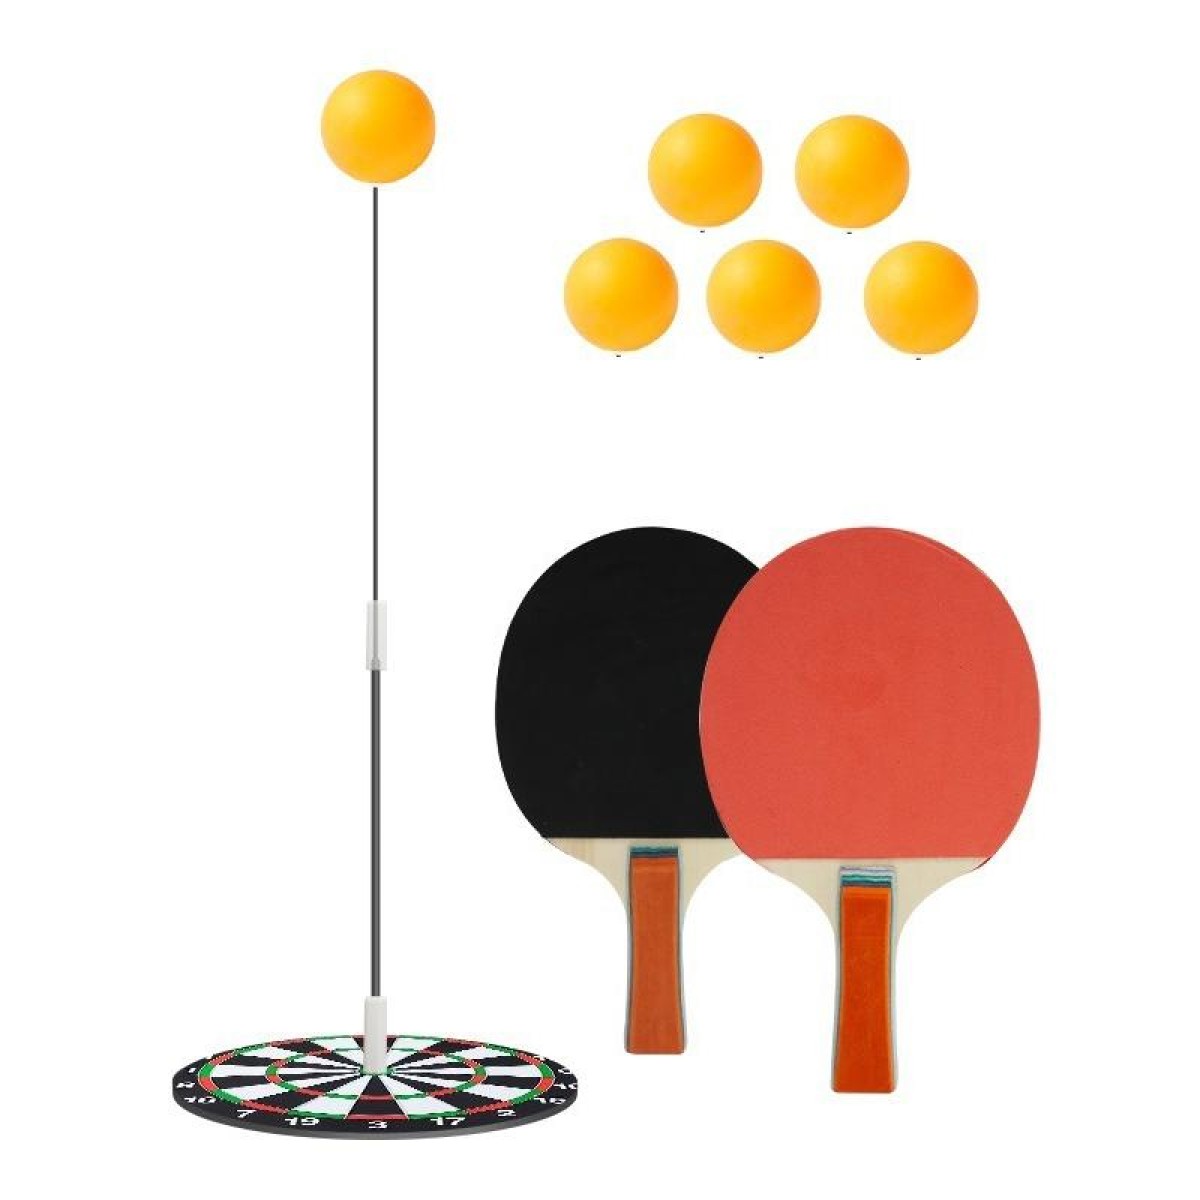 Table Tennis Training Equipment Household Childrens Sparring Coaching Base With Wood Bats, Specs: 6 Balls+1 Pole